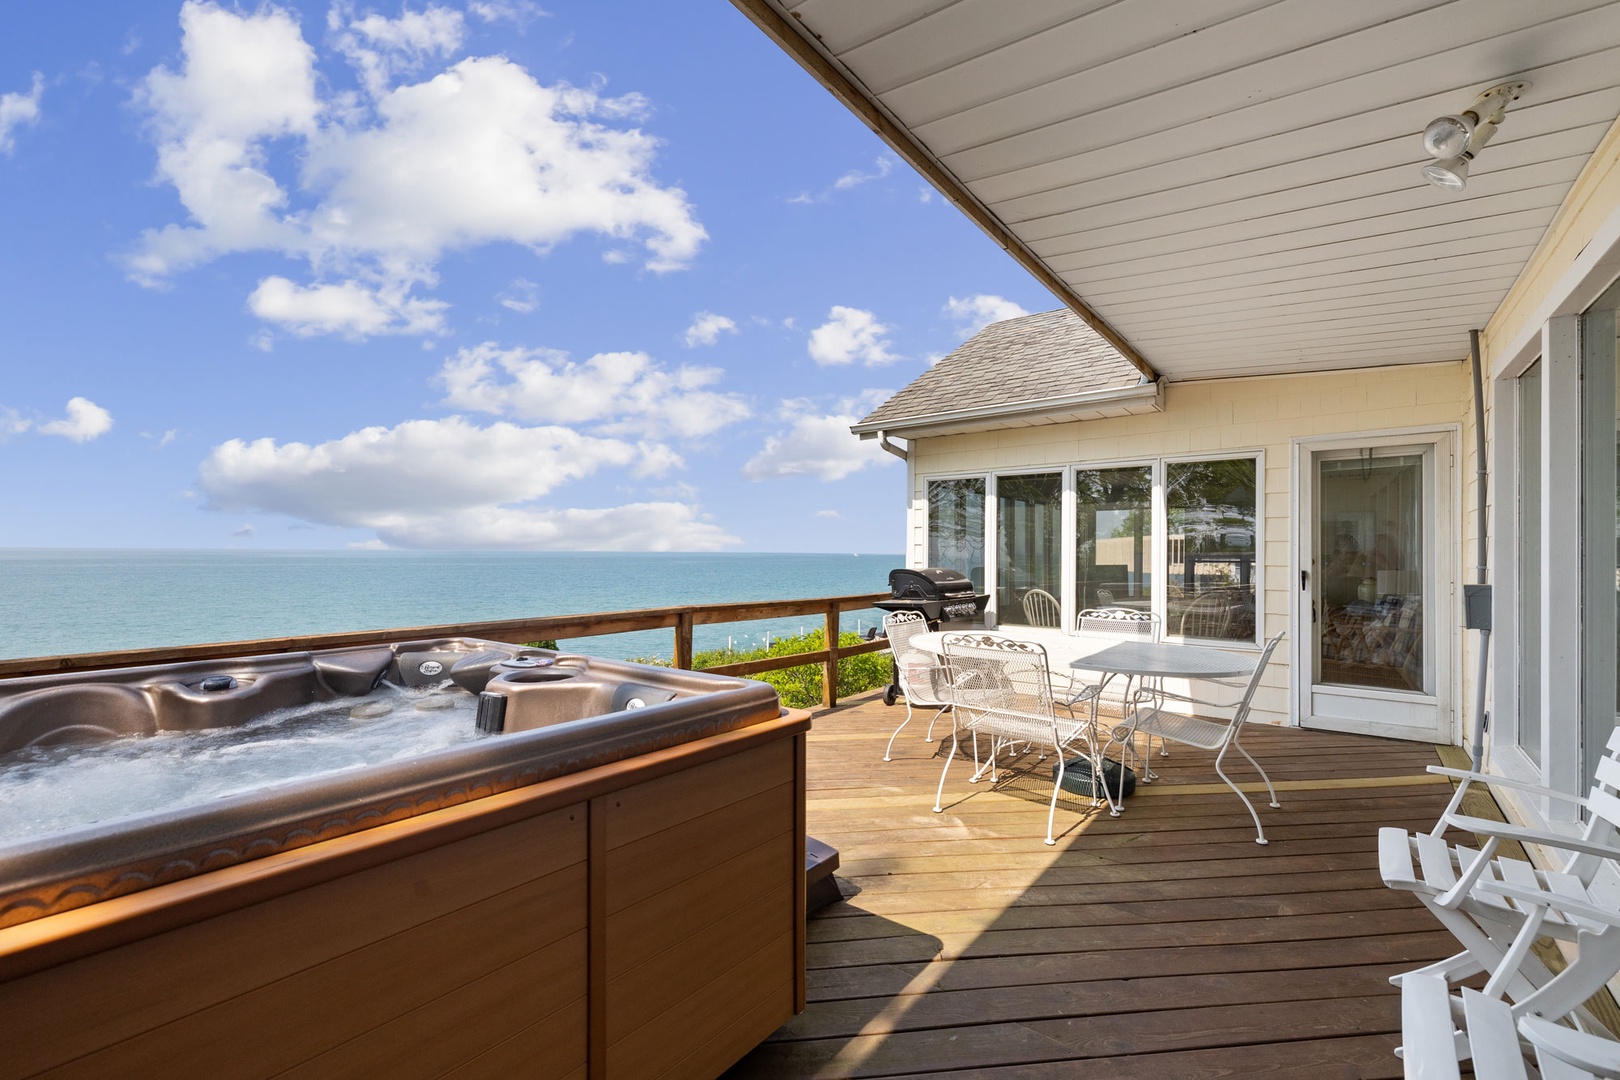 The breathtaking views of Lake Michigan promise an intimate retreat.